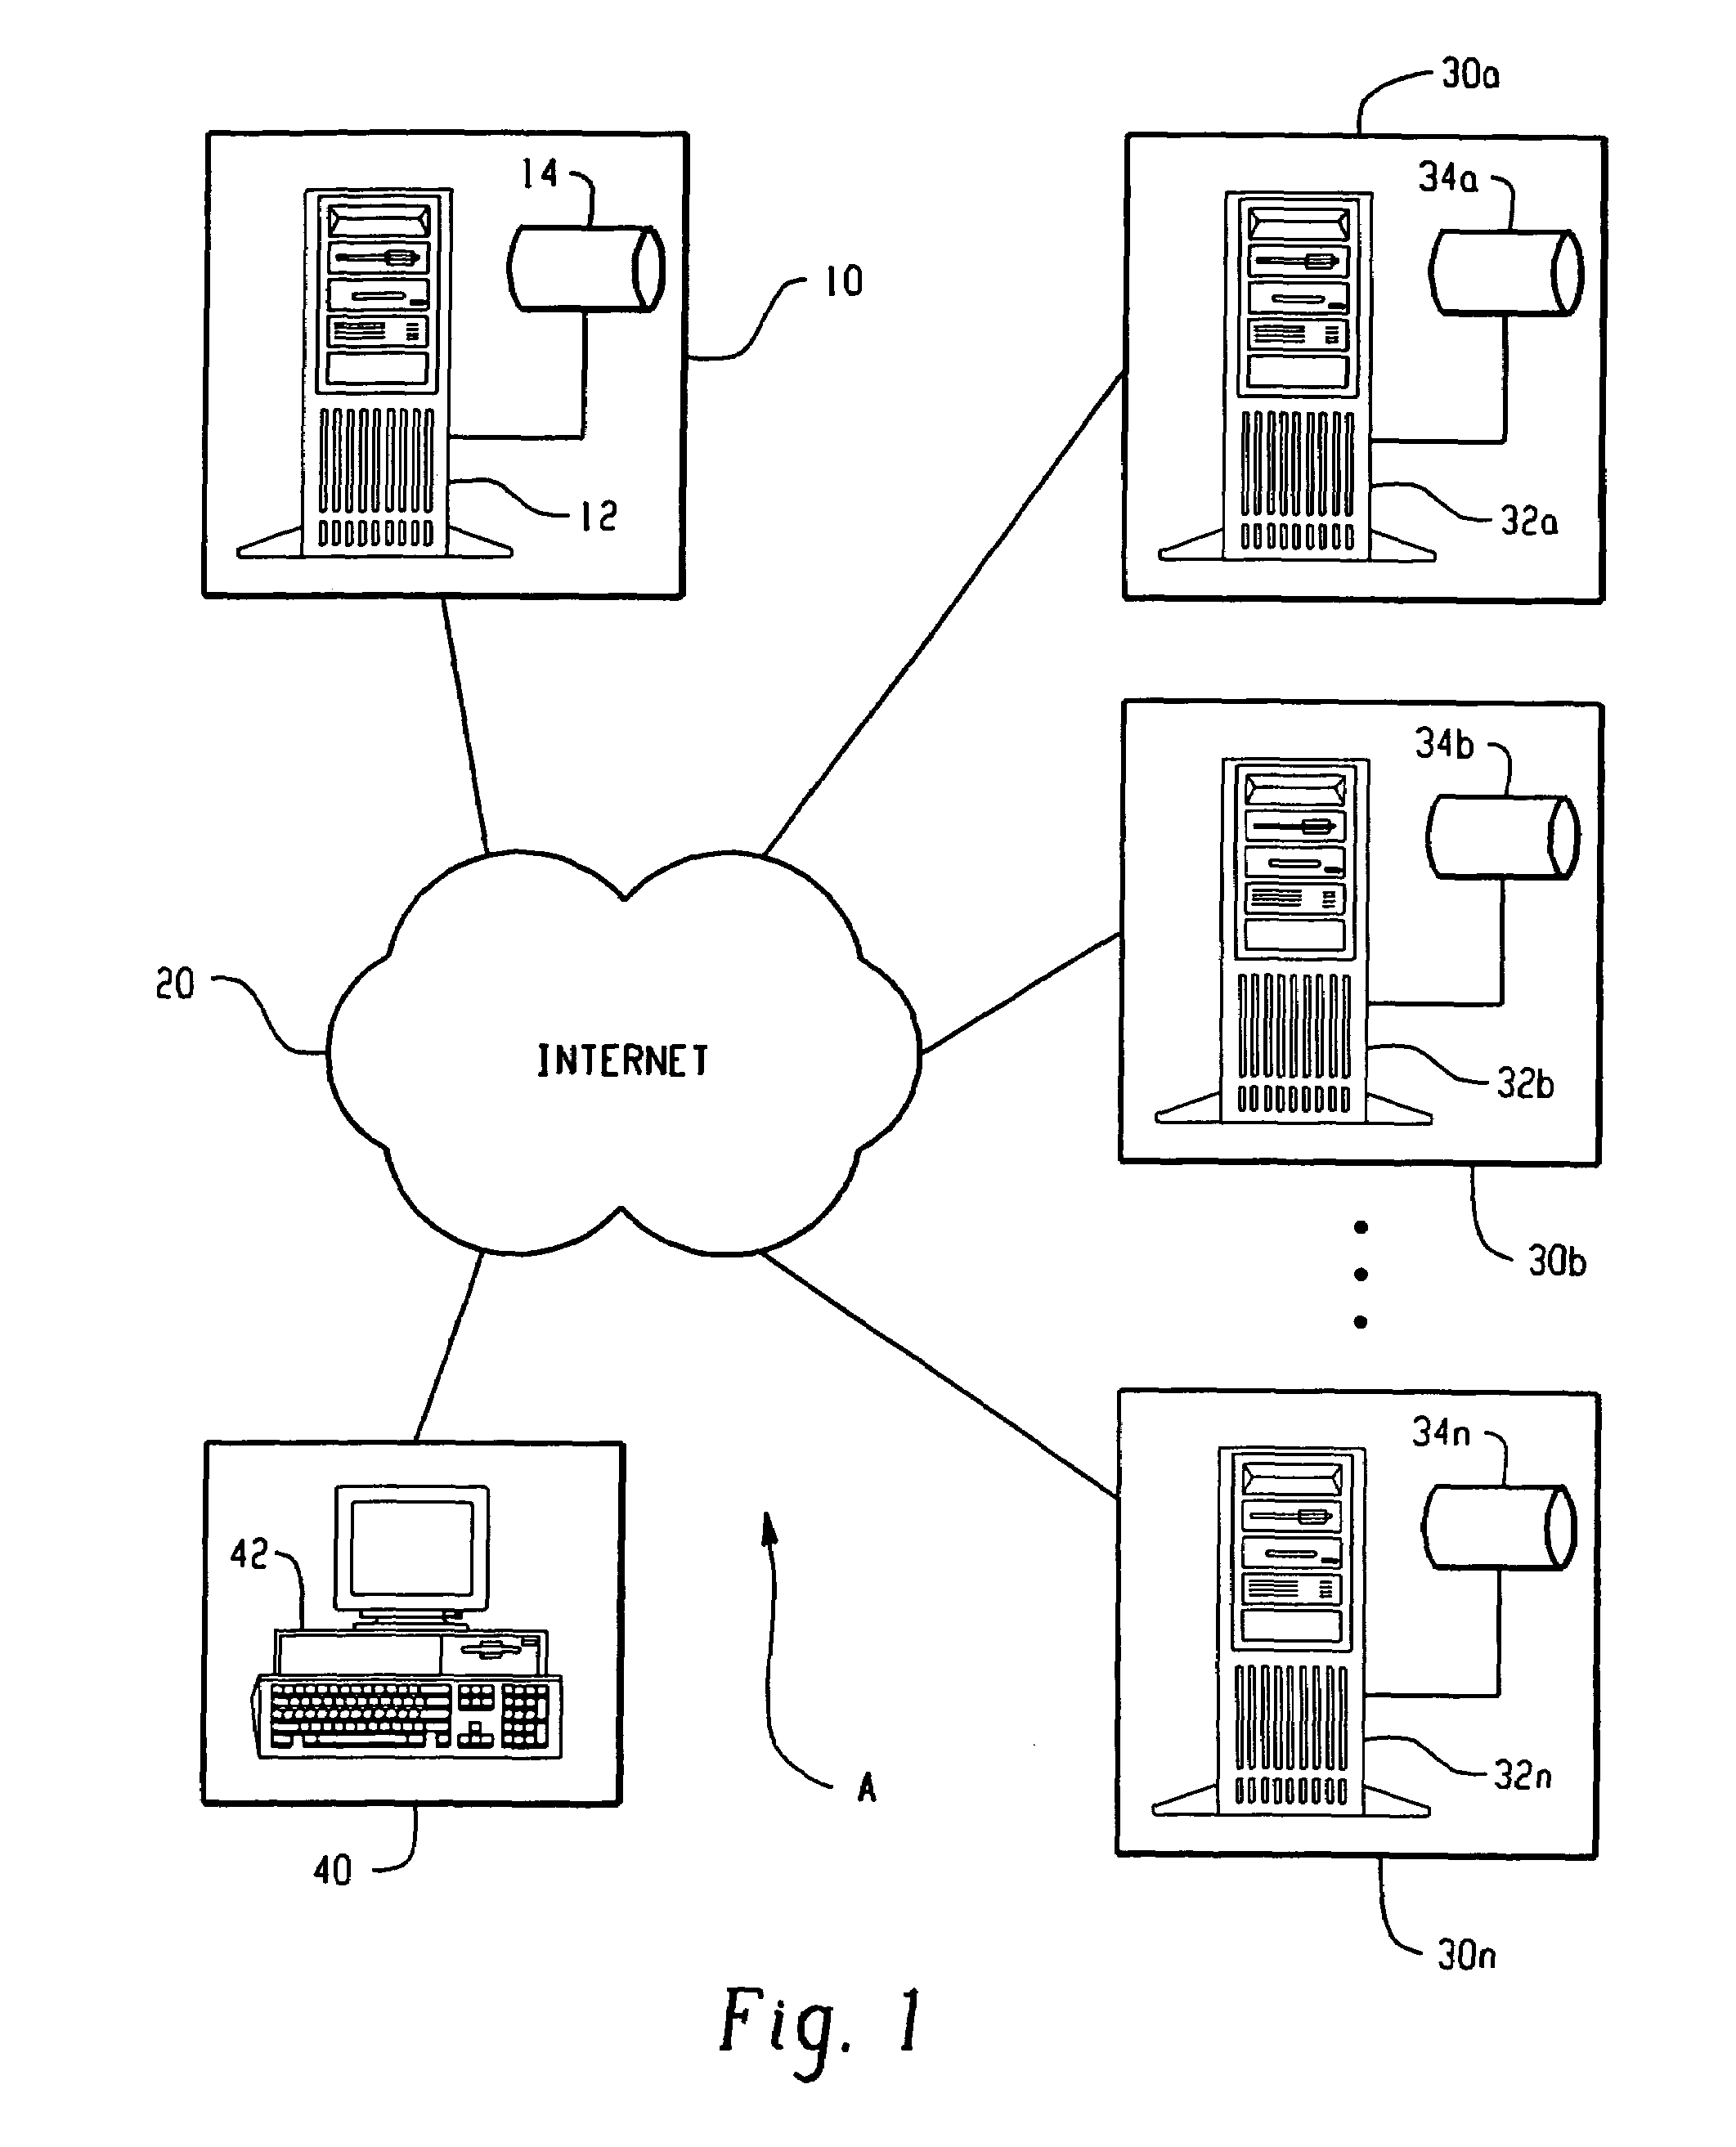 Centralized identity authentication for electronic communication networks